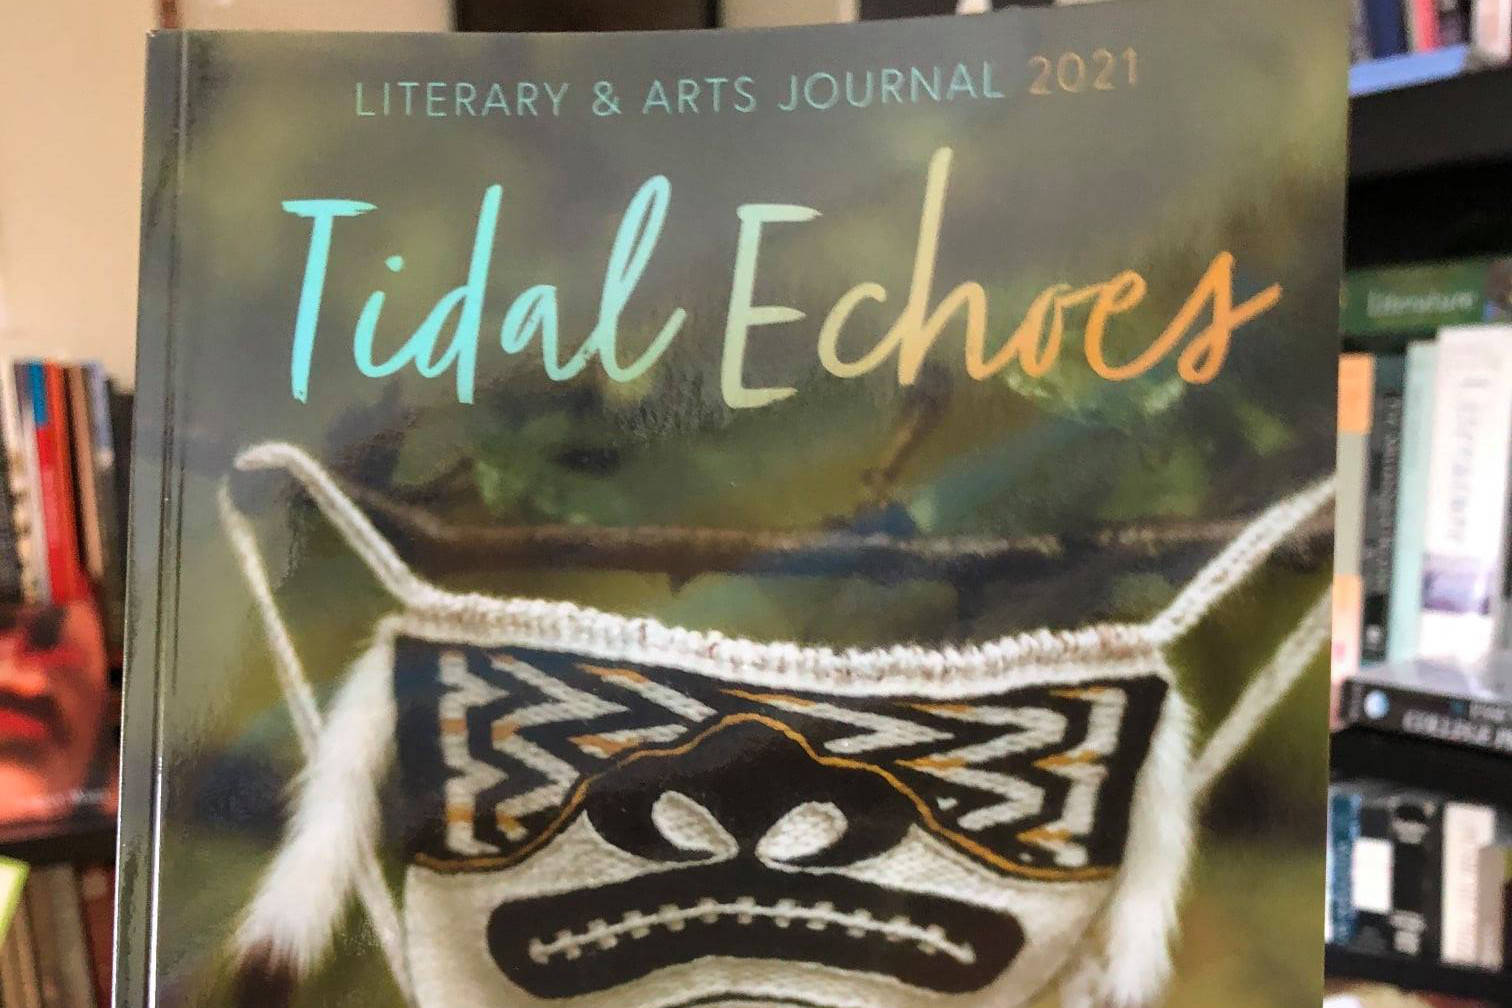 The University of Alaska Southeast’s arts and literary journal Tidal Echoes will drop at a digital release party on Friday, April 2, 2021. (Courtesy photo / Tidal Echoes)